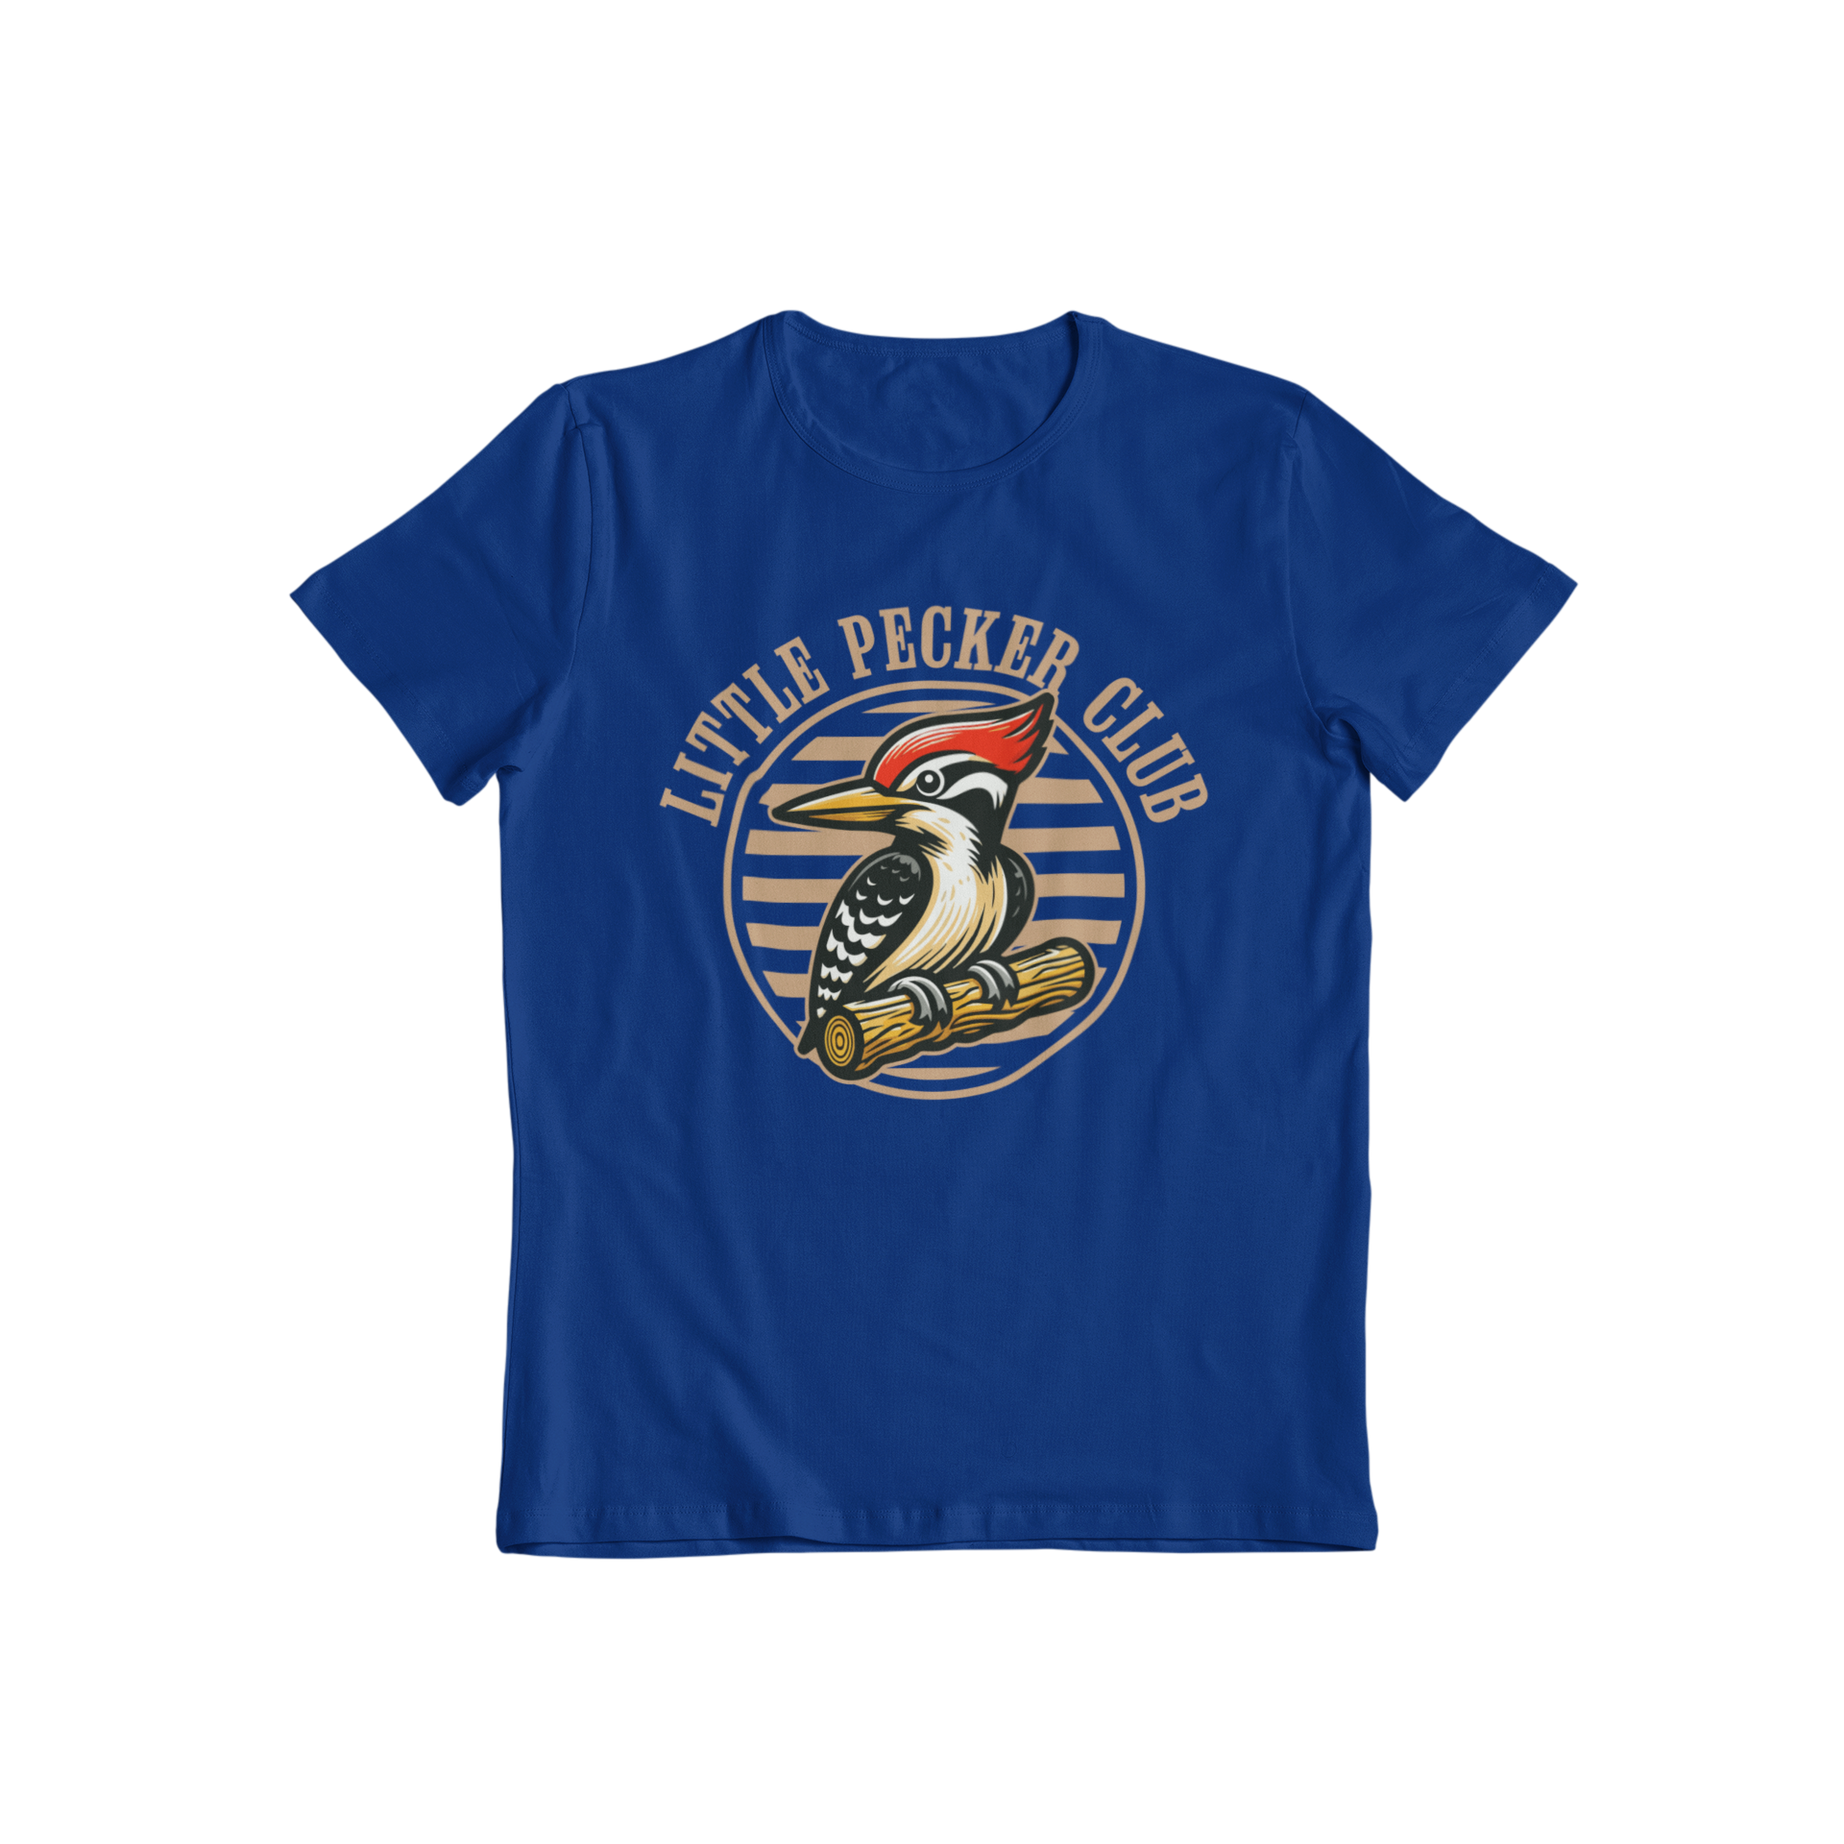 Join the Little Pecker Club with this quirky t-shirt featuring a woodpecker graphic. Perfect for those with a sense of humor, this classic shirt is sure to turn heads. No need to take yourself too seriously, just have fun with it!